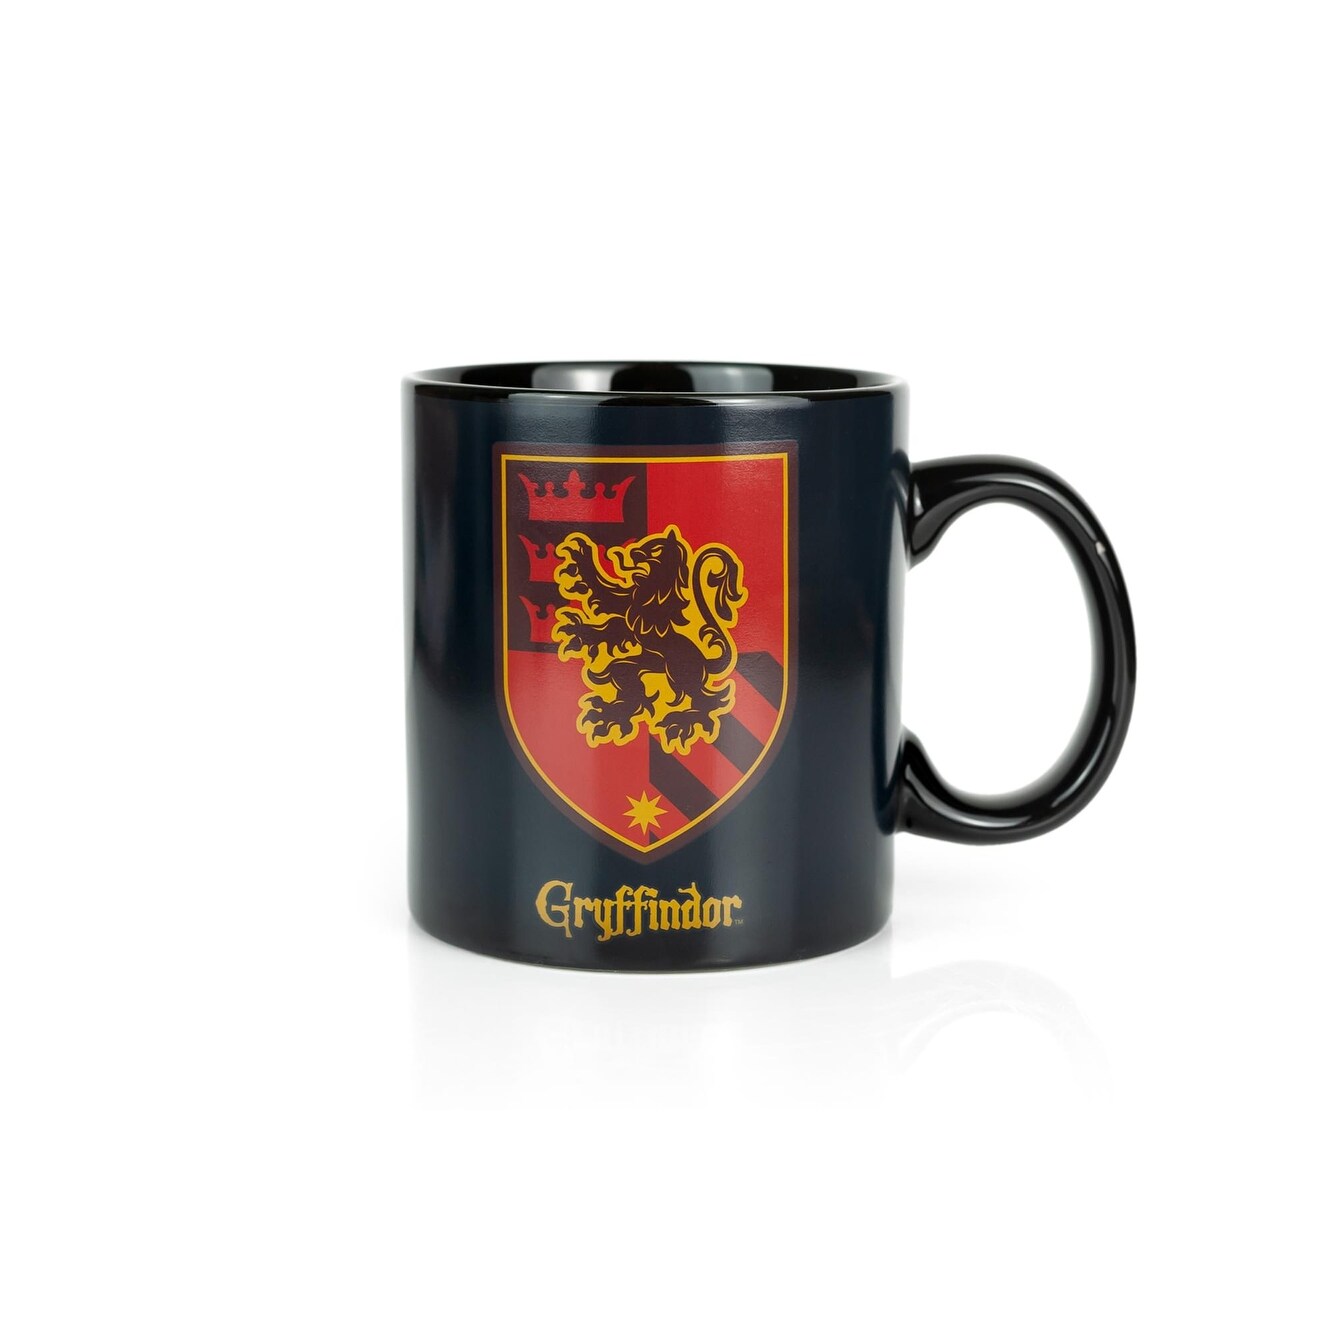 https://ak1.ostkcdn.com/images/products/is/images/direct/2c31223bfc8ffa505dcac5dd7a30f34ece102c99/Harry-Potter-Gryffindor-20oz-Heat-Reveal-Ceramic-Coffee-Mug-%7C-Color-Changing-Cup.jpg